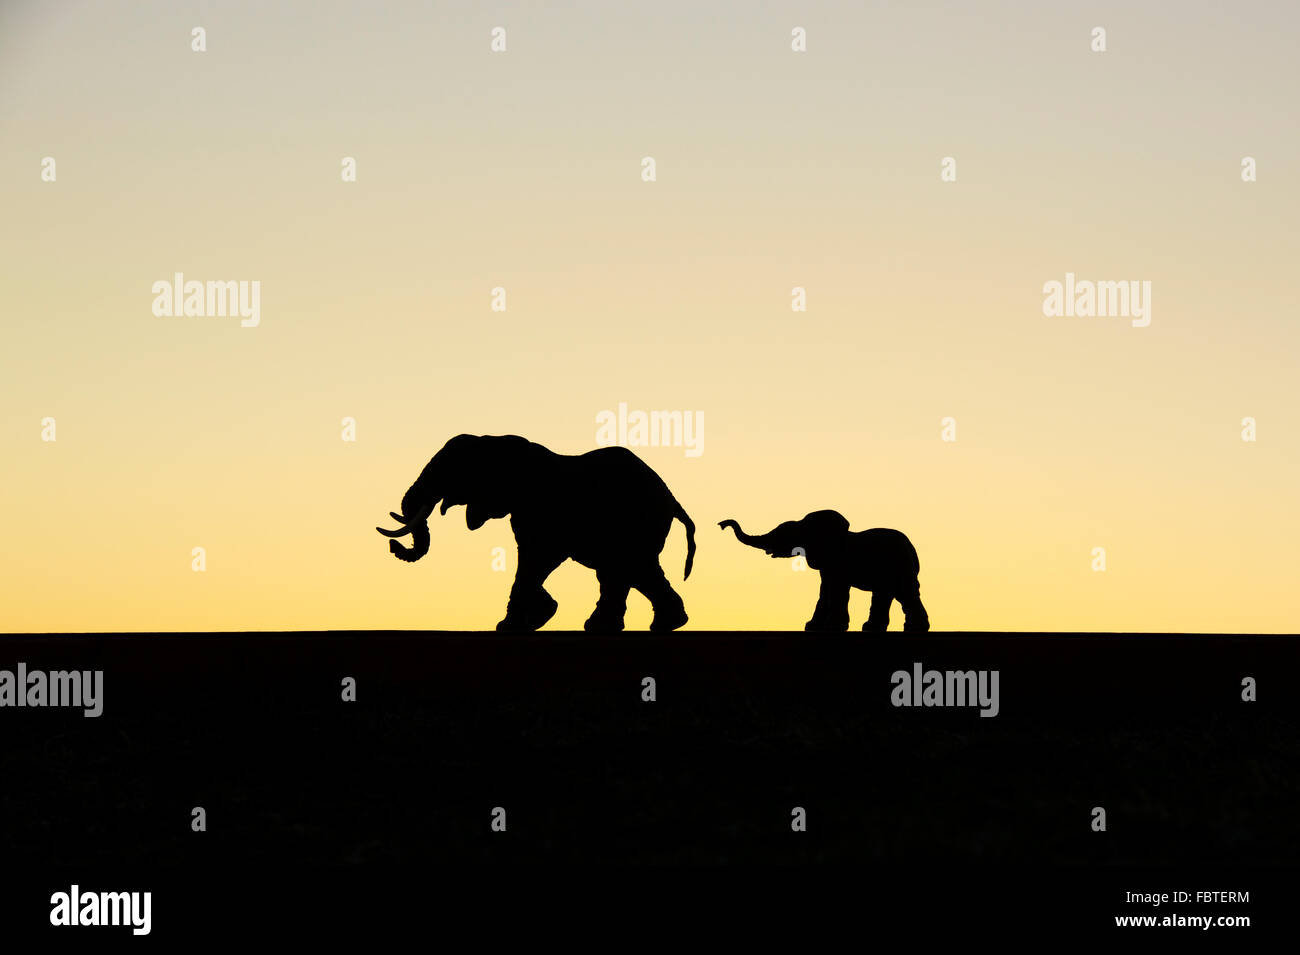 Toy model elephants silhouette against a dawn sky Stock Photo